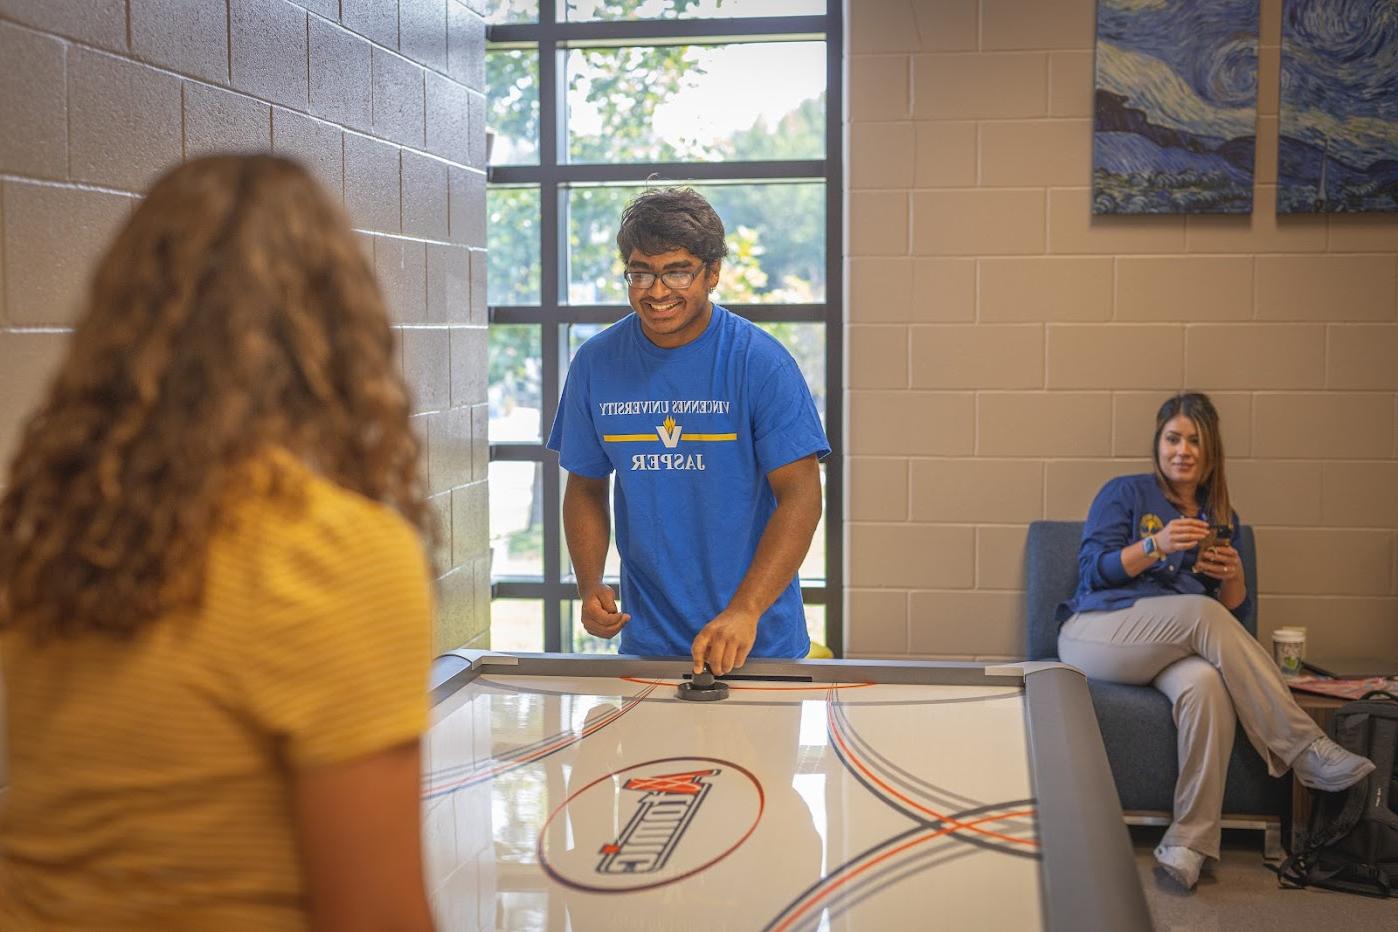 Two students playing air hockey while another watches